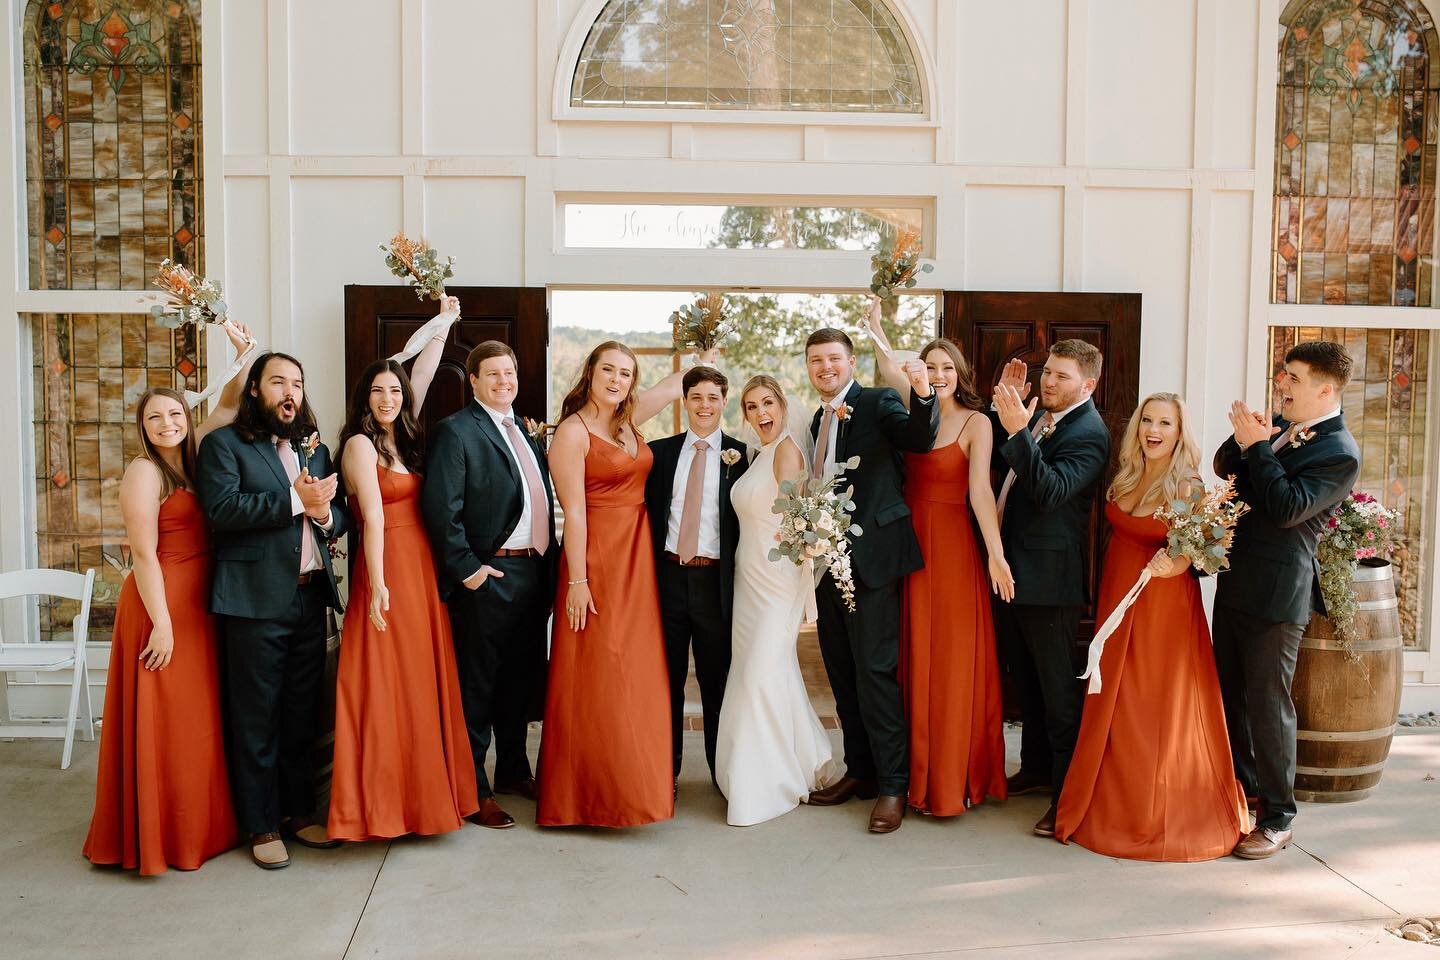 Loved this bridal party from a wedding back in May that I second shot with @kaylanelsonphotographysc! 

The bouquets, the dresses, and all the details made this bridal party just stunning 😍. But most importantly, they were all so extremely happy all